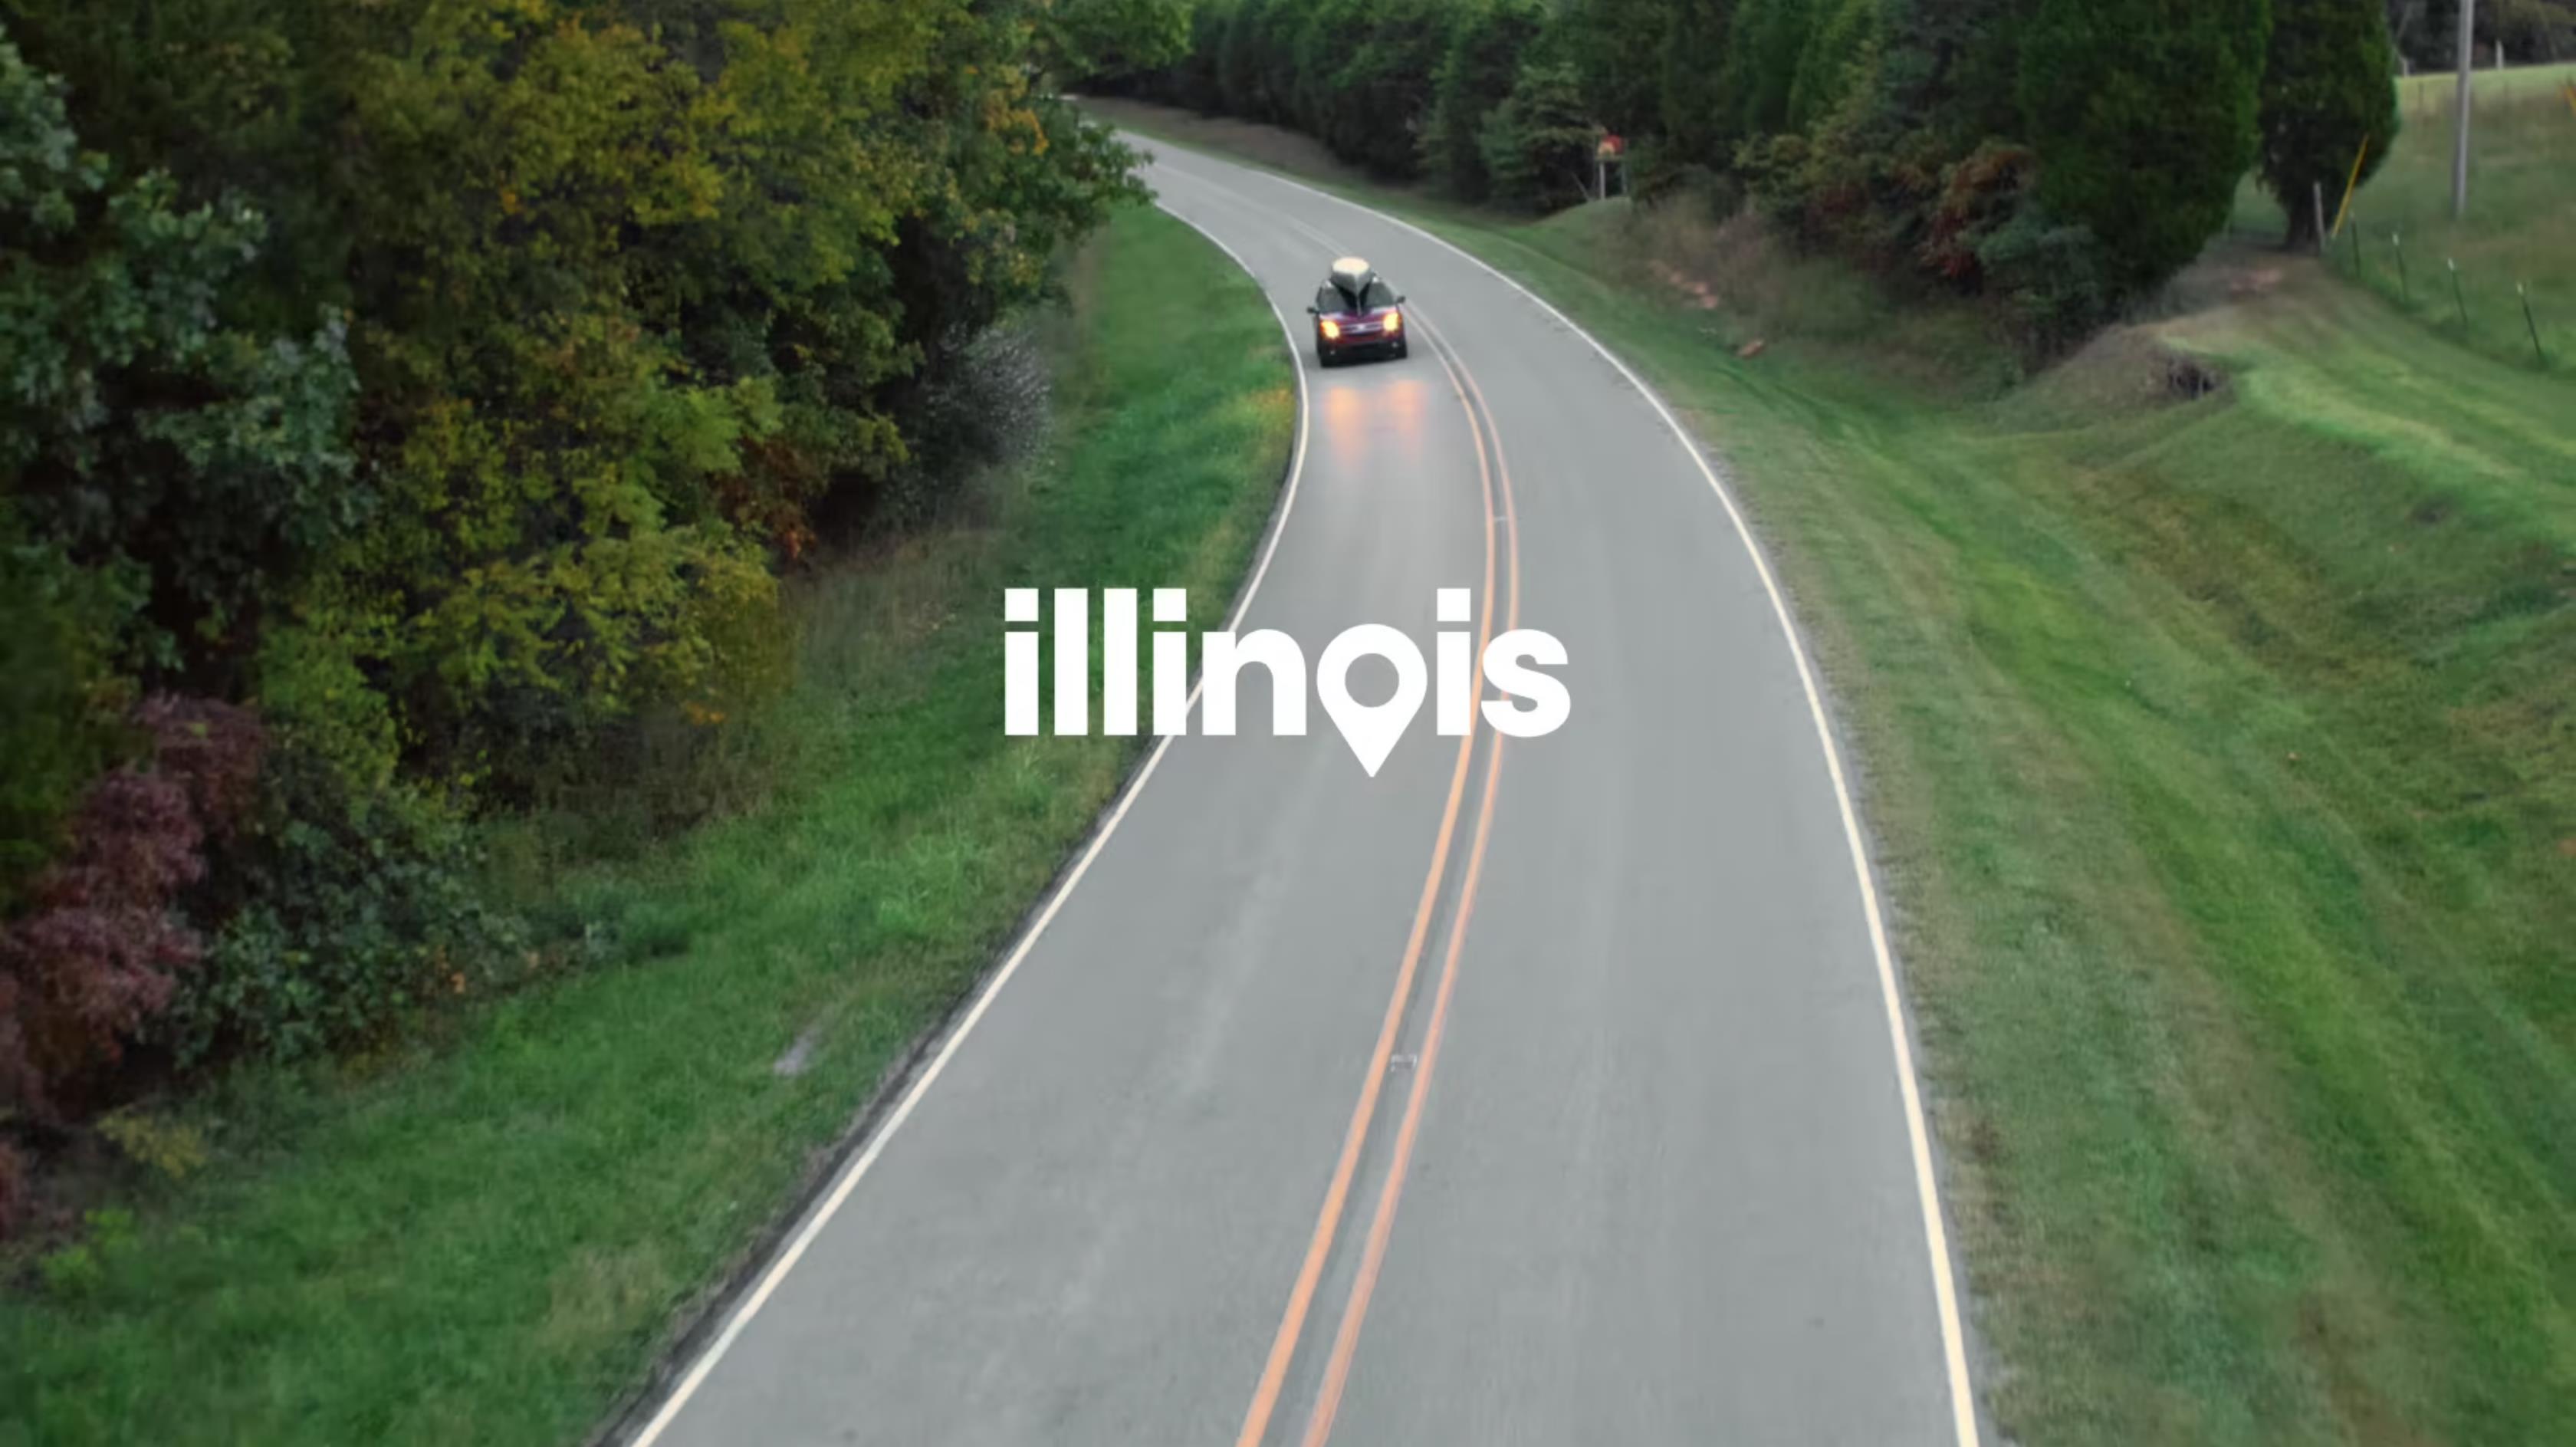 Illinois Tourism: Time for Me to Drive